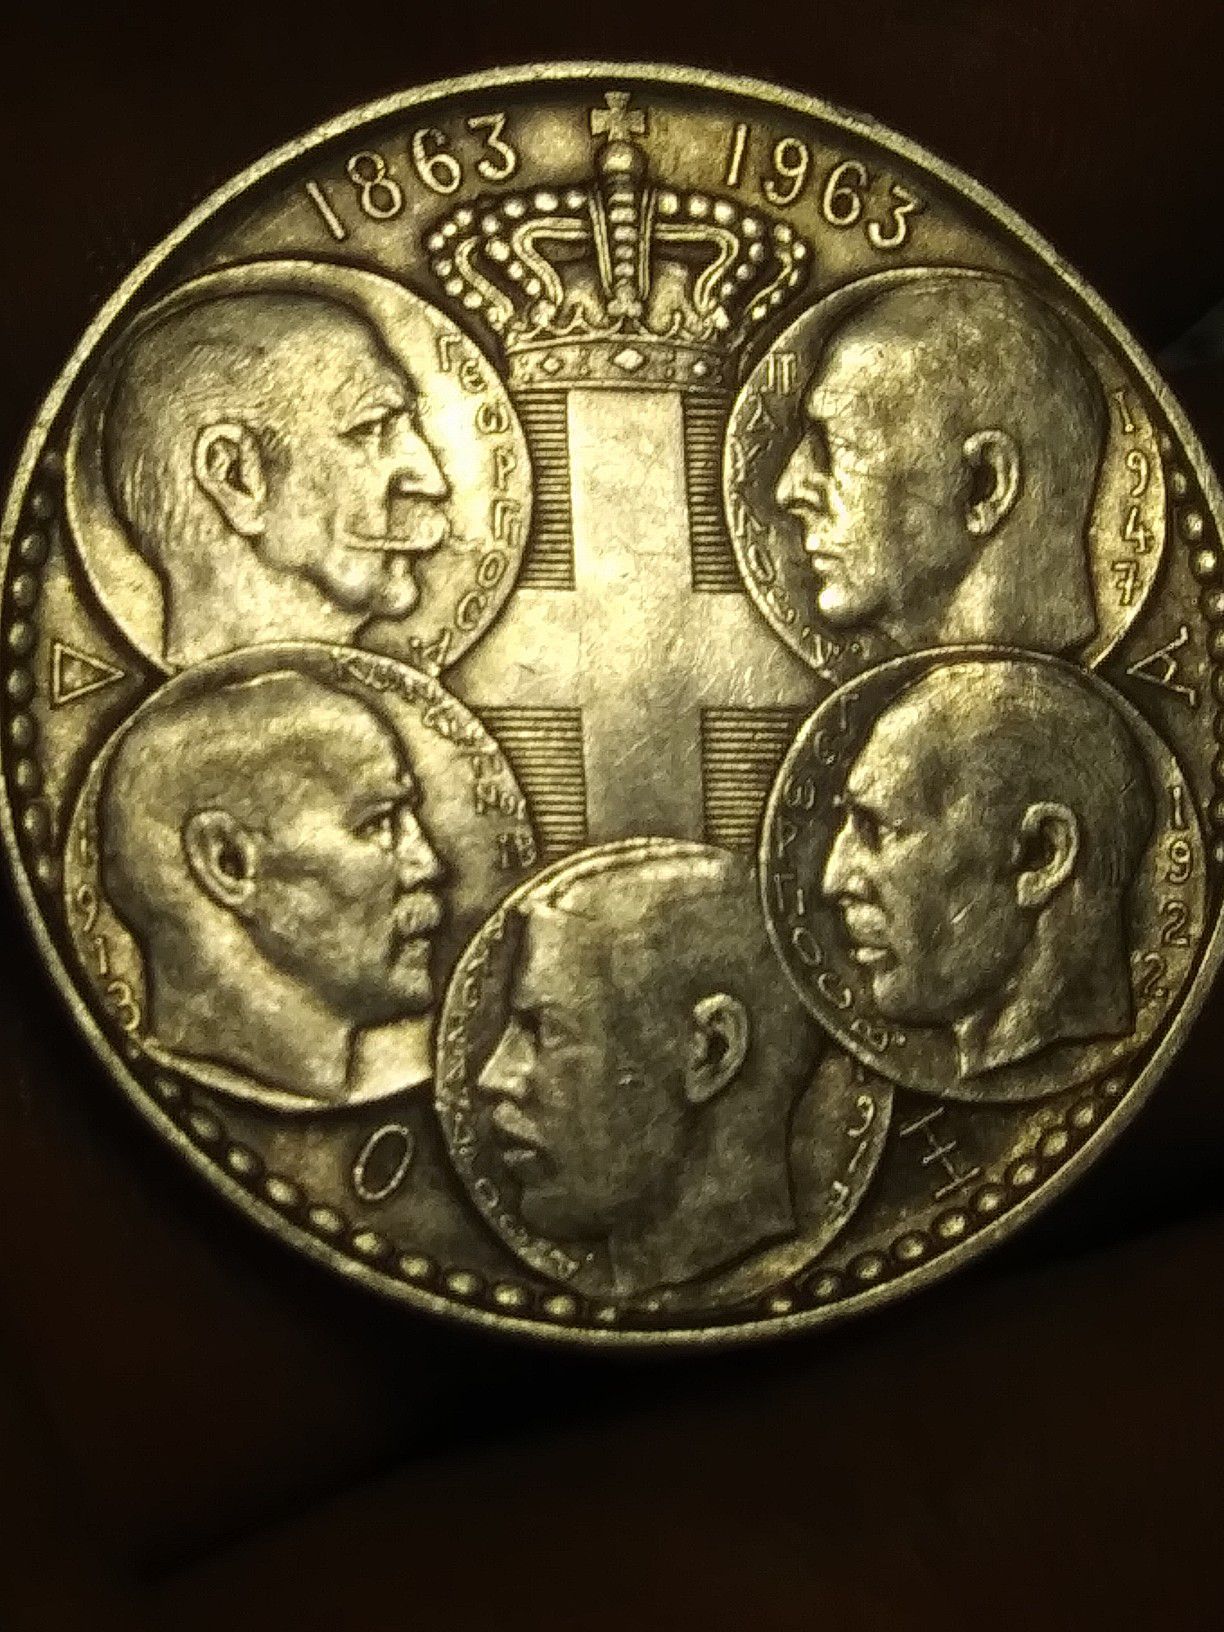 Awesome collectible foreign silver